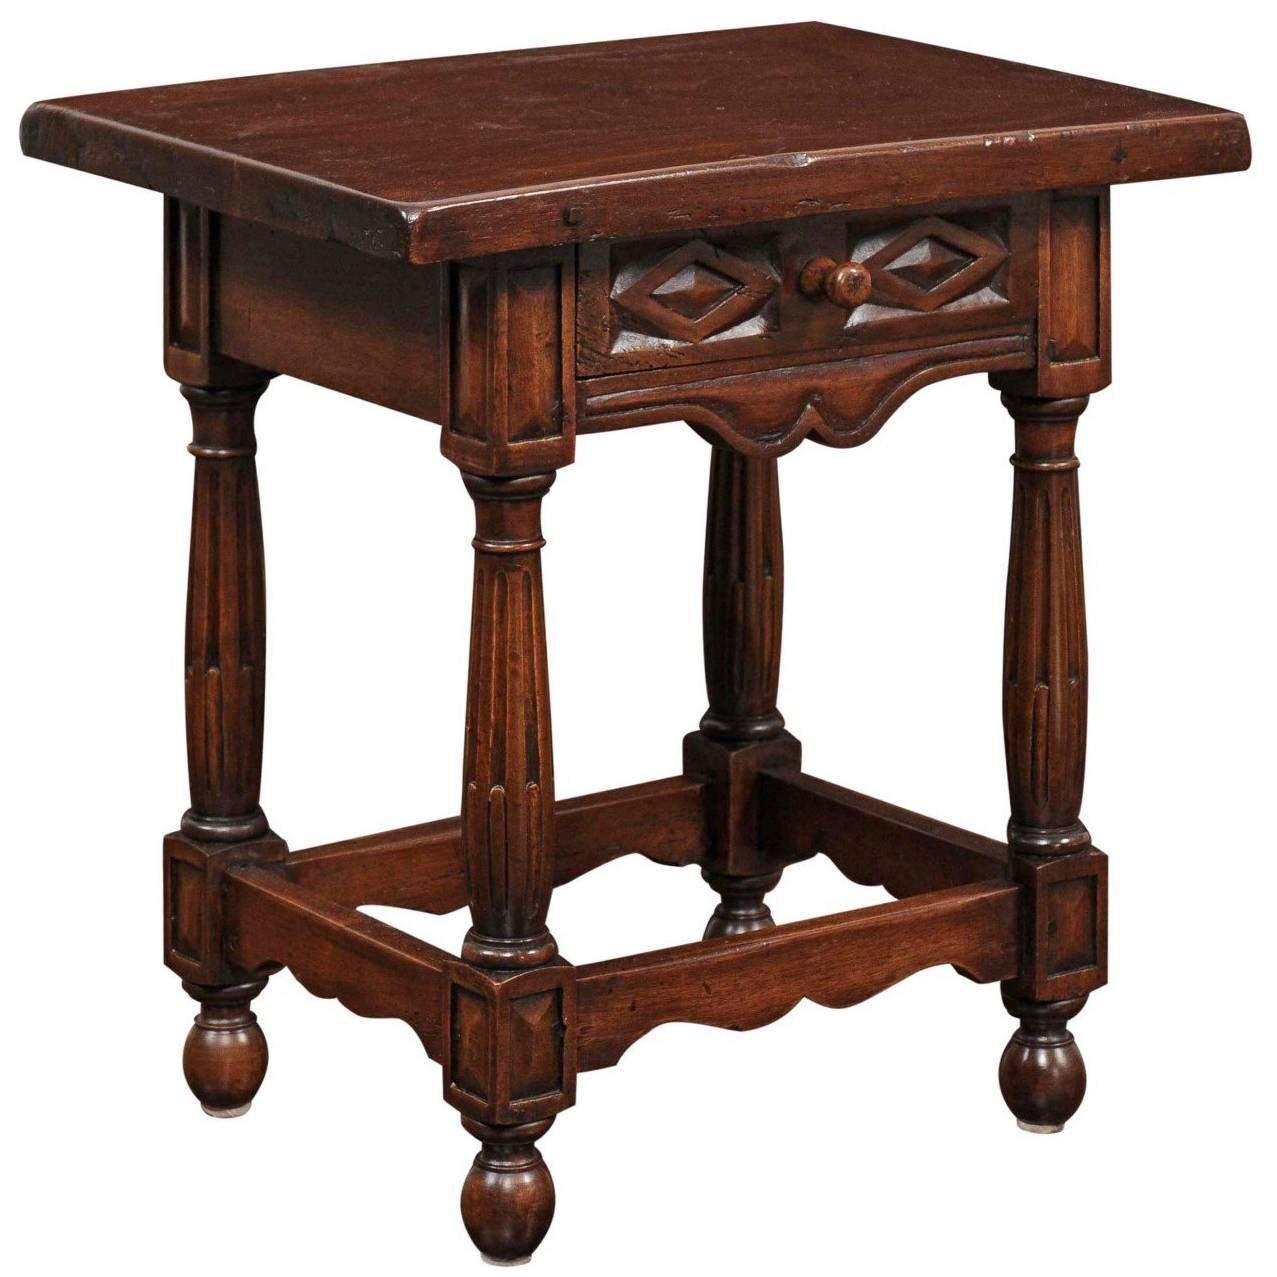 Petite Italian Walnut Side Table with Single Drawer and Fluted Legs, circa 1870 For Sale